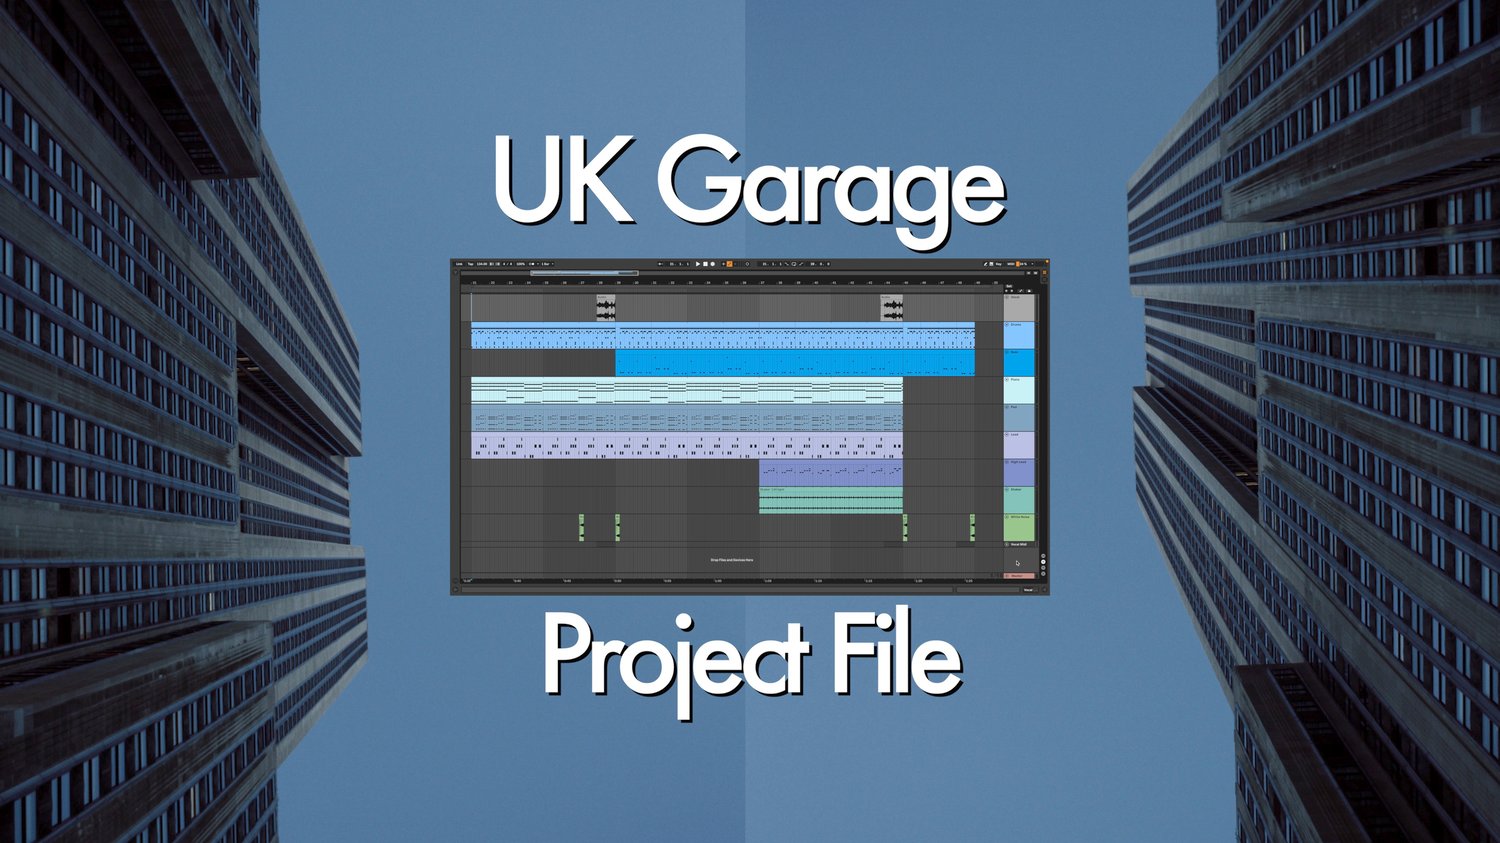 This project file contains all the primary elements of a contemporary UK Garage track. In terms of sound design, I strove to emulate the sounds heard in Fred Again’s Delilah. Priority was placed on the heavy side-chain compression that glues the drums, bass, and piano parts together. Made entirely with stock Ableton Live Instruments and Effects.